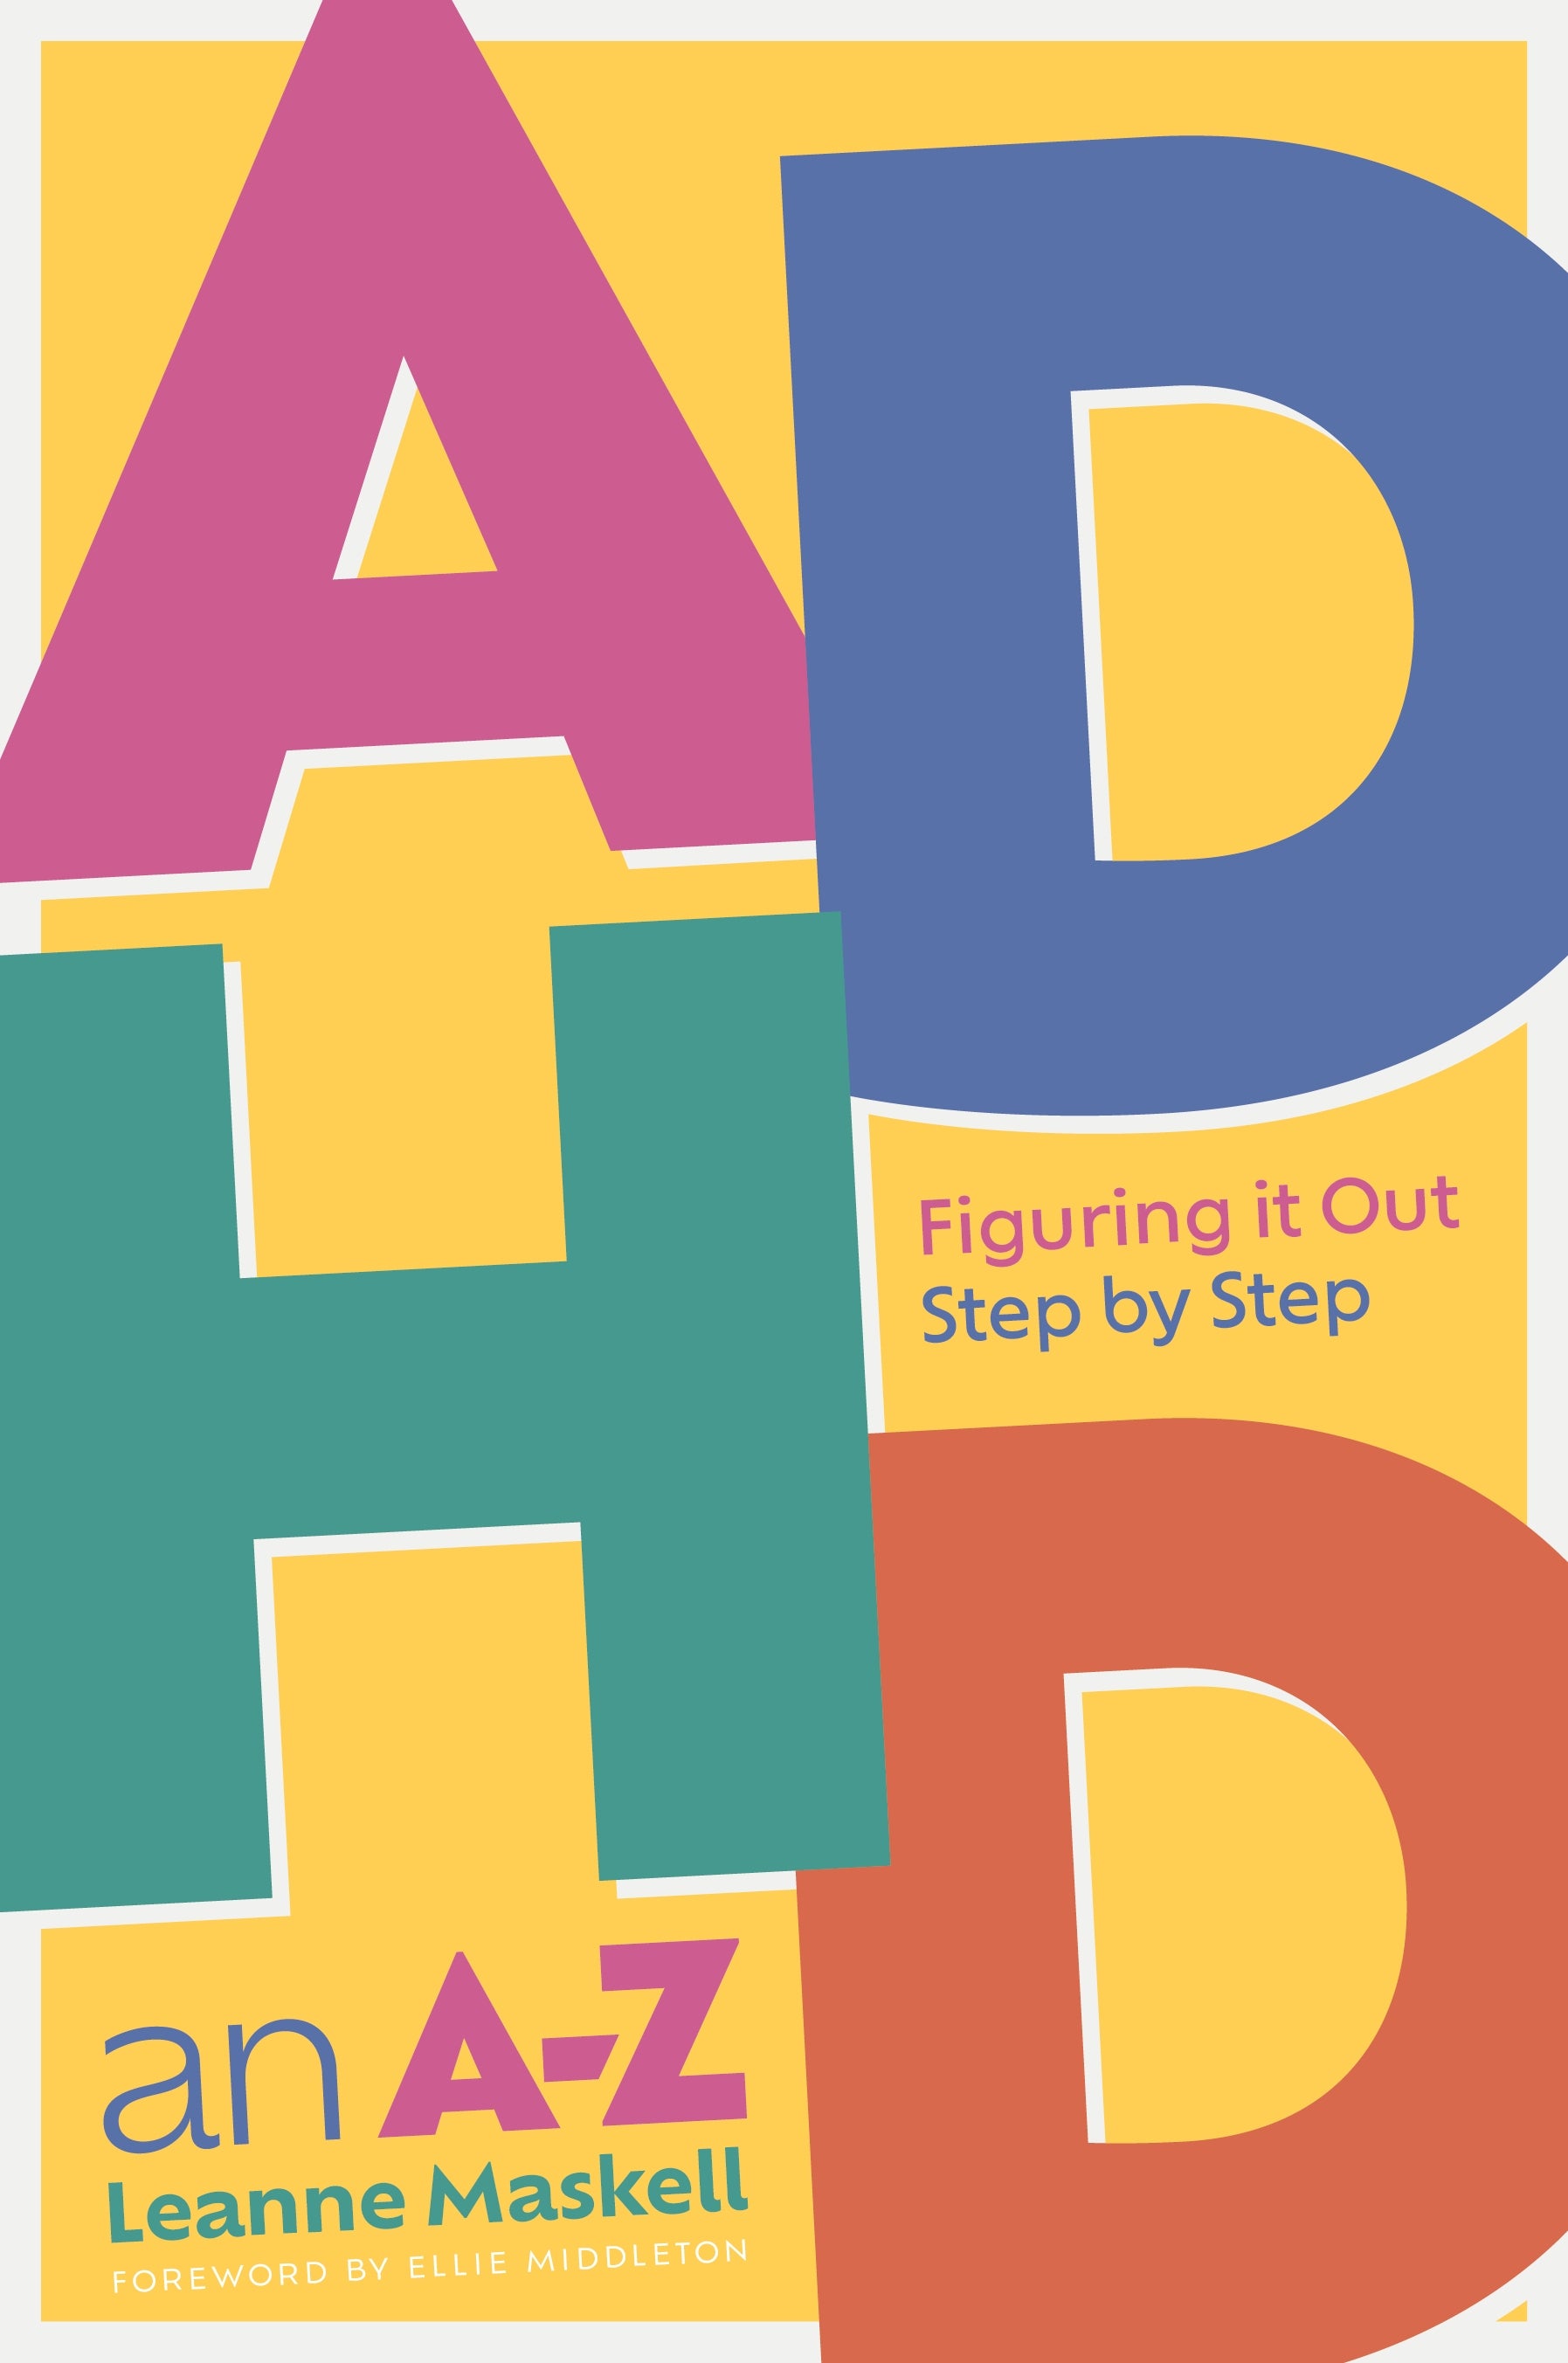 ADHD an A-Z by Leanne Maskell